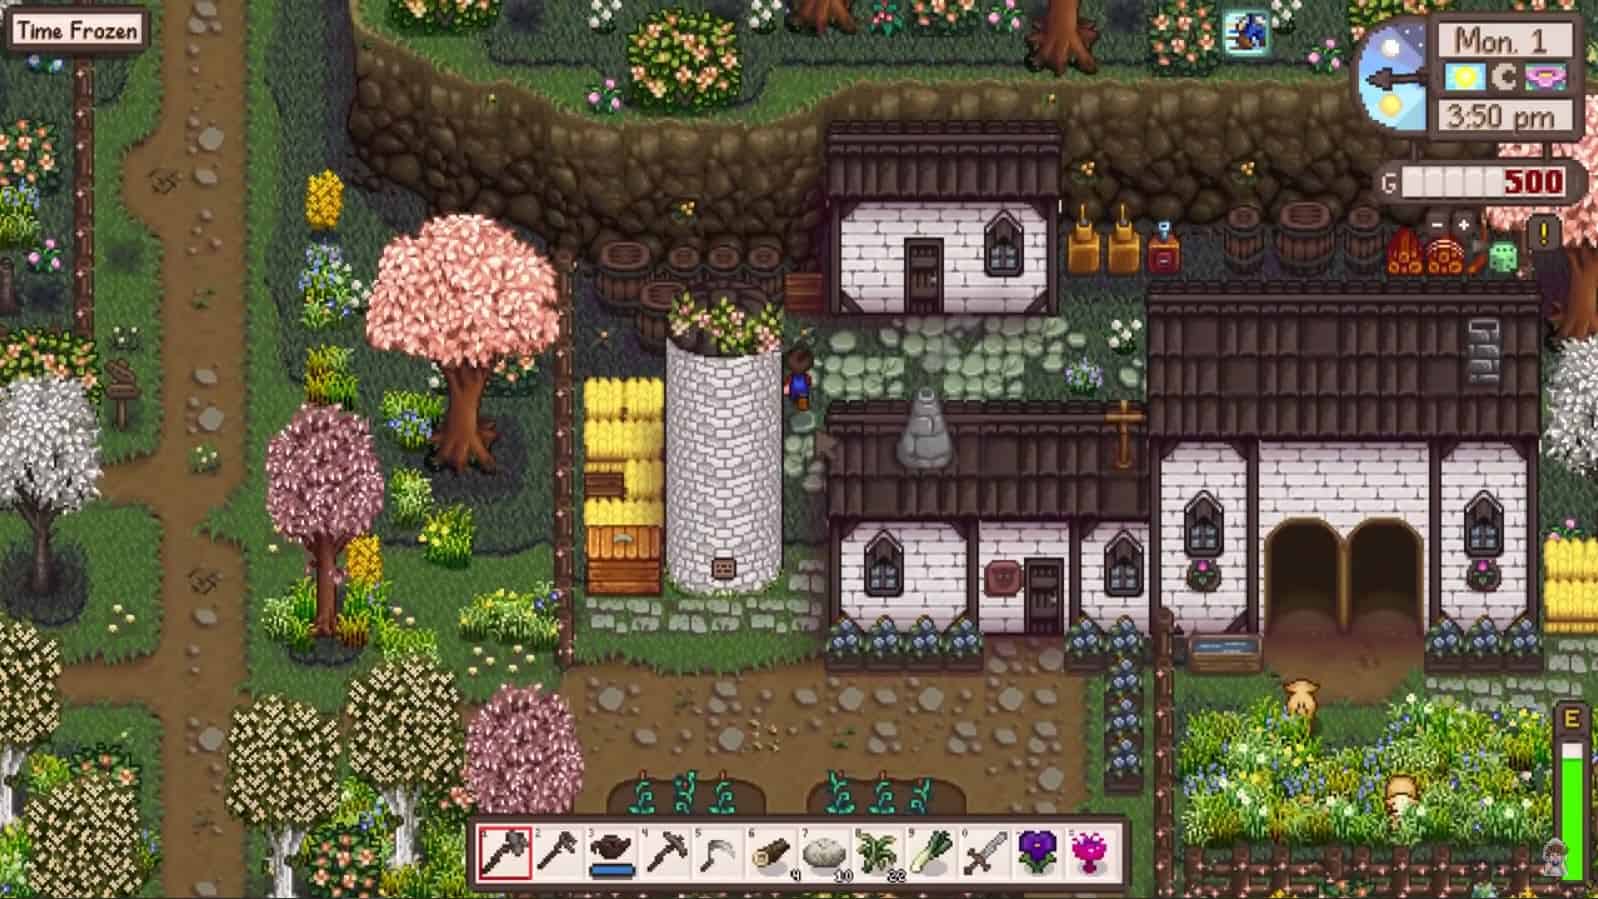 stardew valley expanded